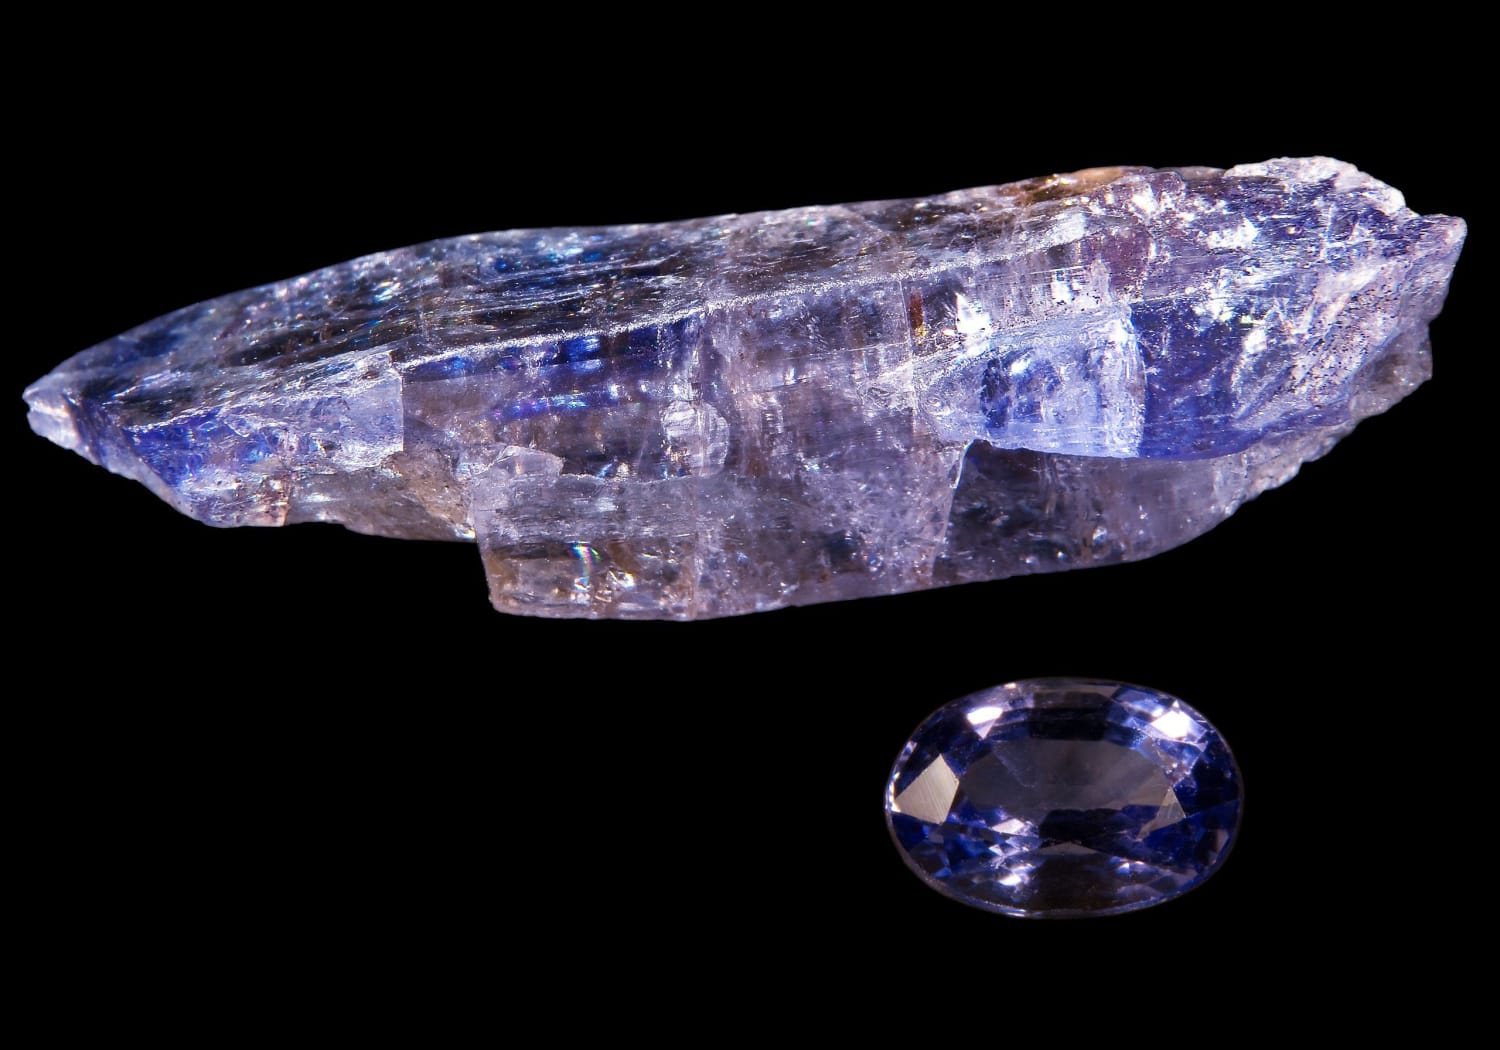 This is a tanzanite stone. These only appear in one place in the world, mount Kilimanjaro in Tanzania, Africa. They are 1000x rarer than daimonds.